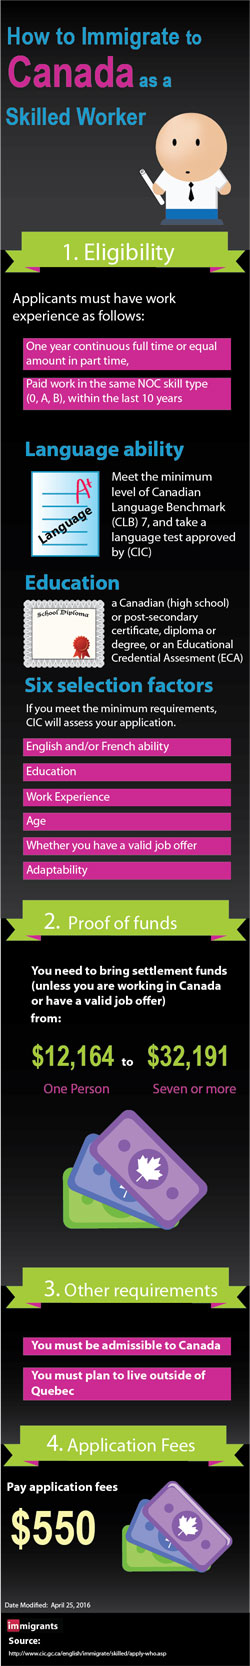 Canada Skilled worker visa infographic